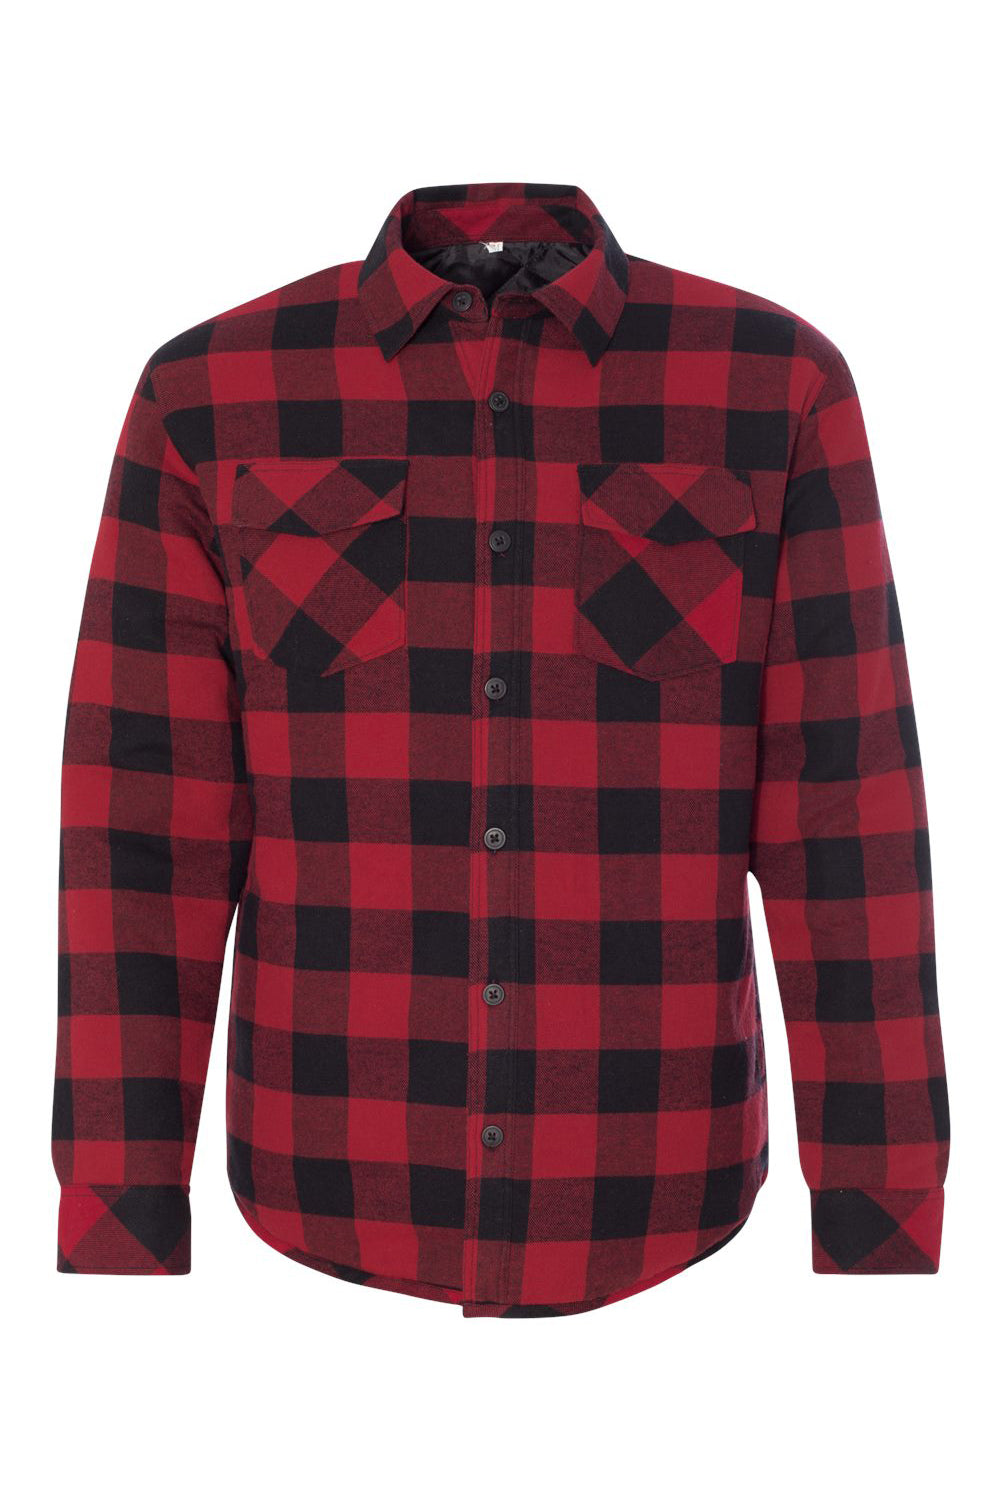 Burnside 8610 Mens Quilted Flannel Button Down Shirt Jacket Red/Black Buffalo Flat Front